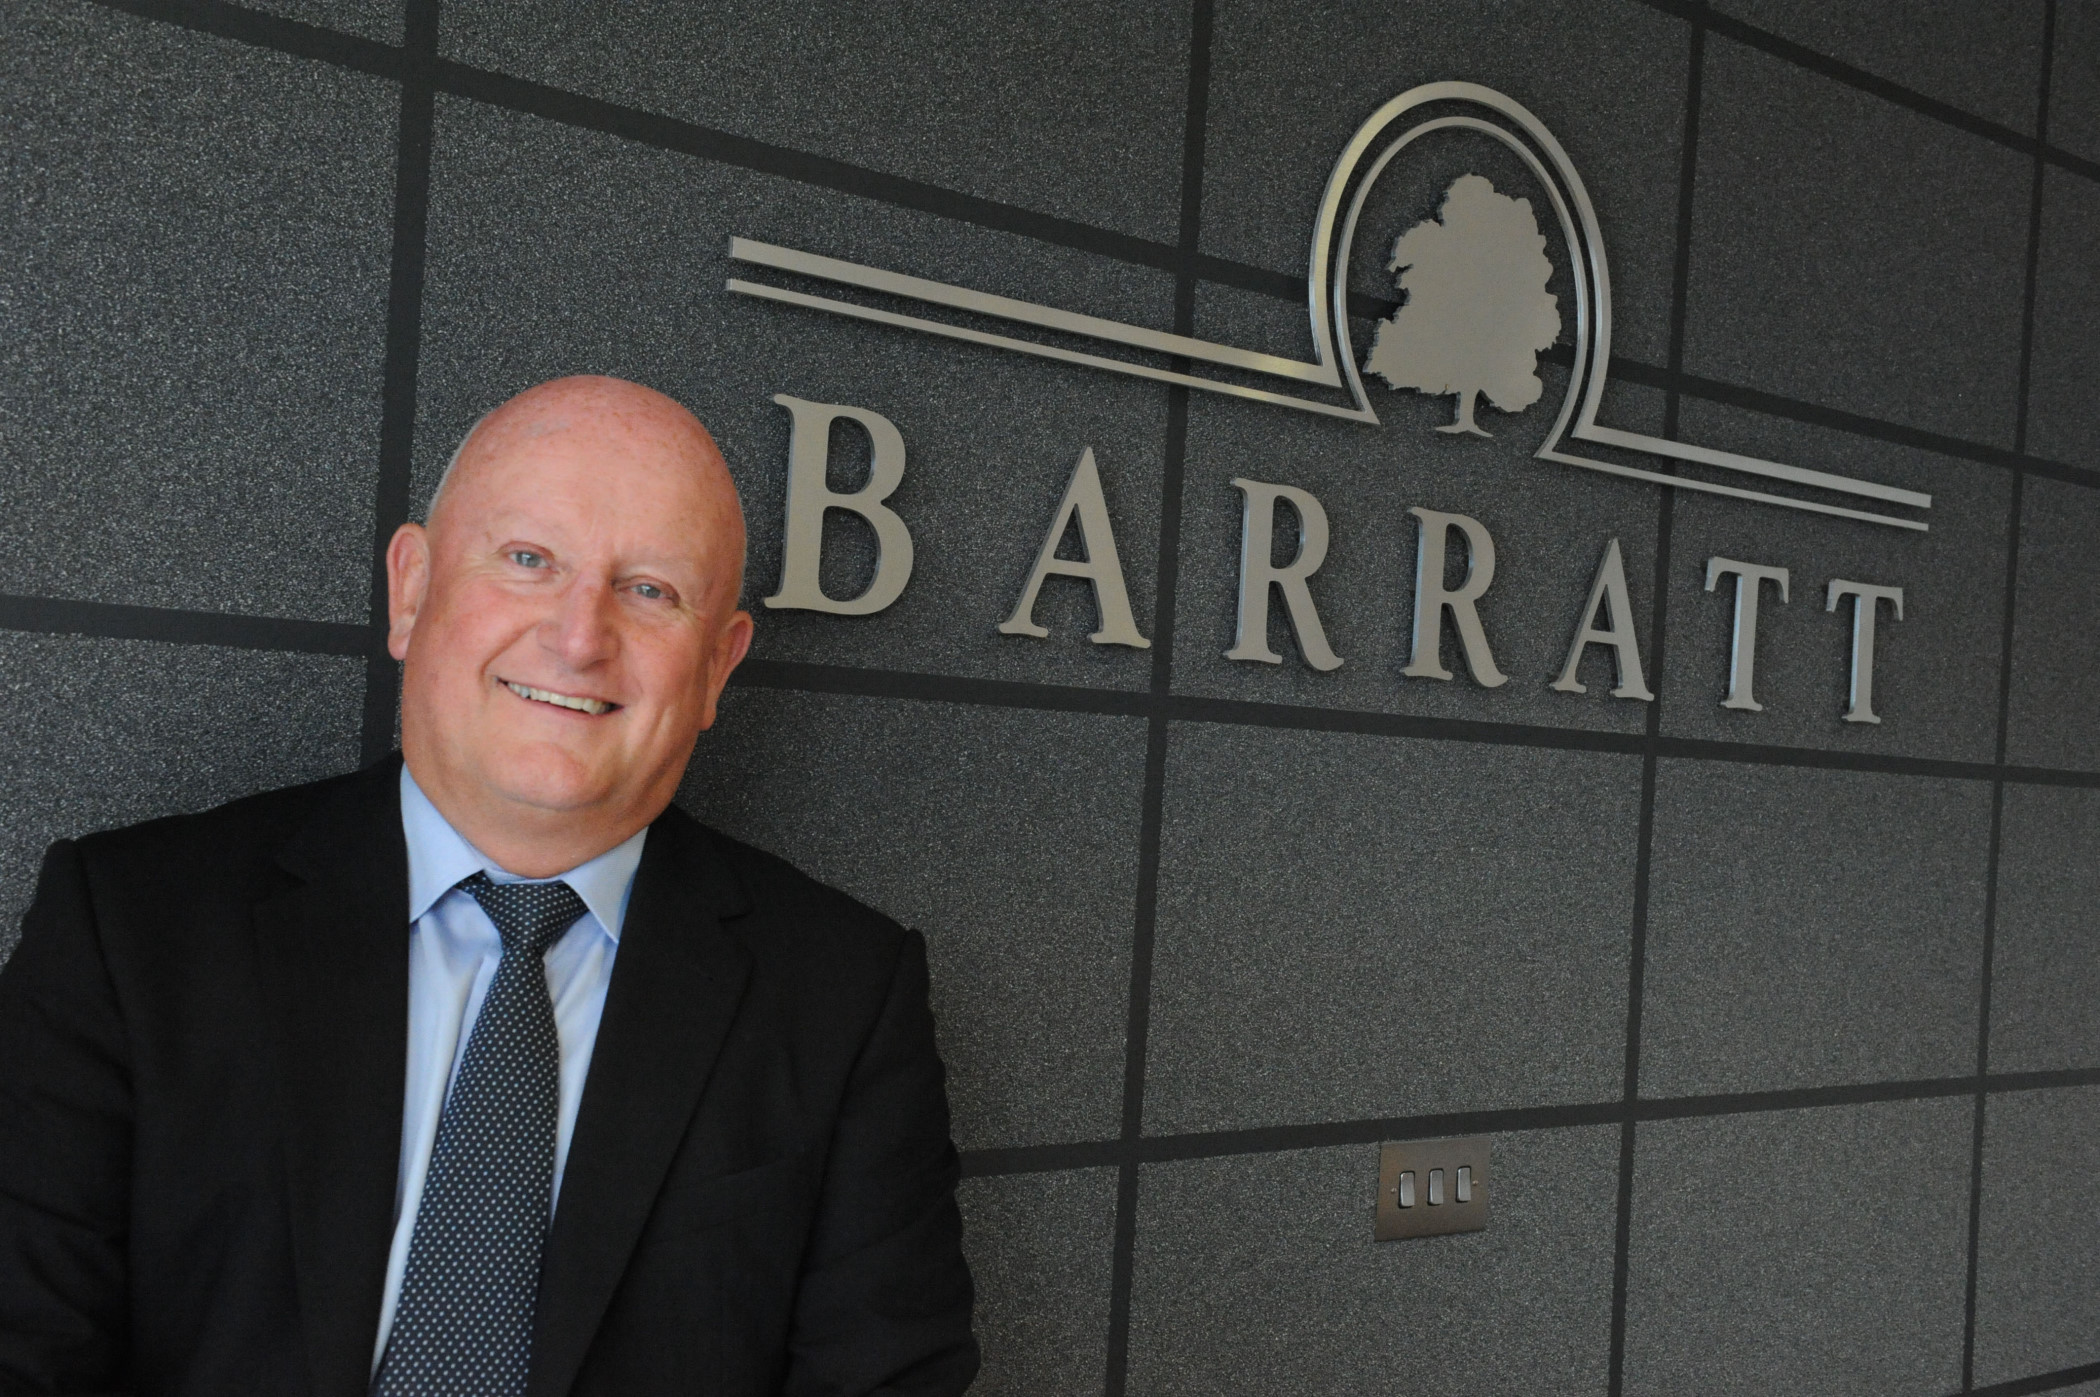 Barratt expects to sell fewer homes despite recent rise in demand